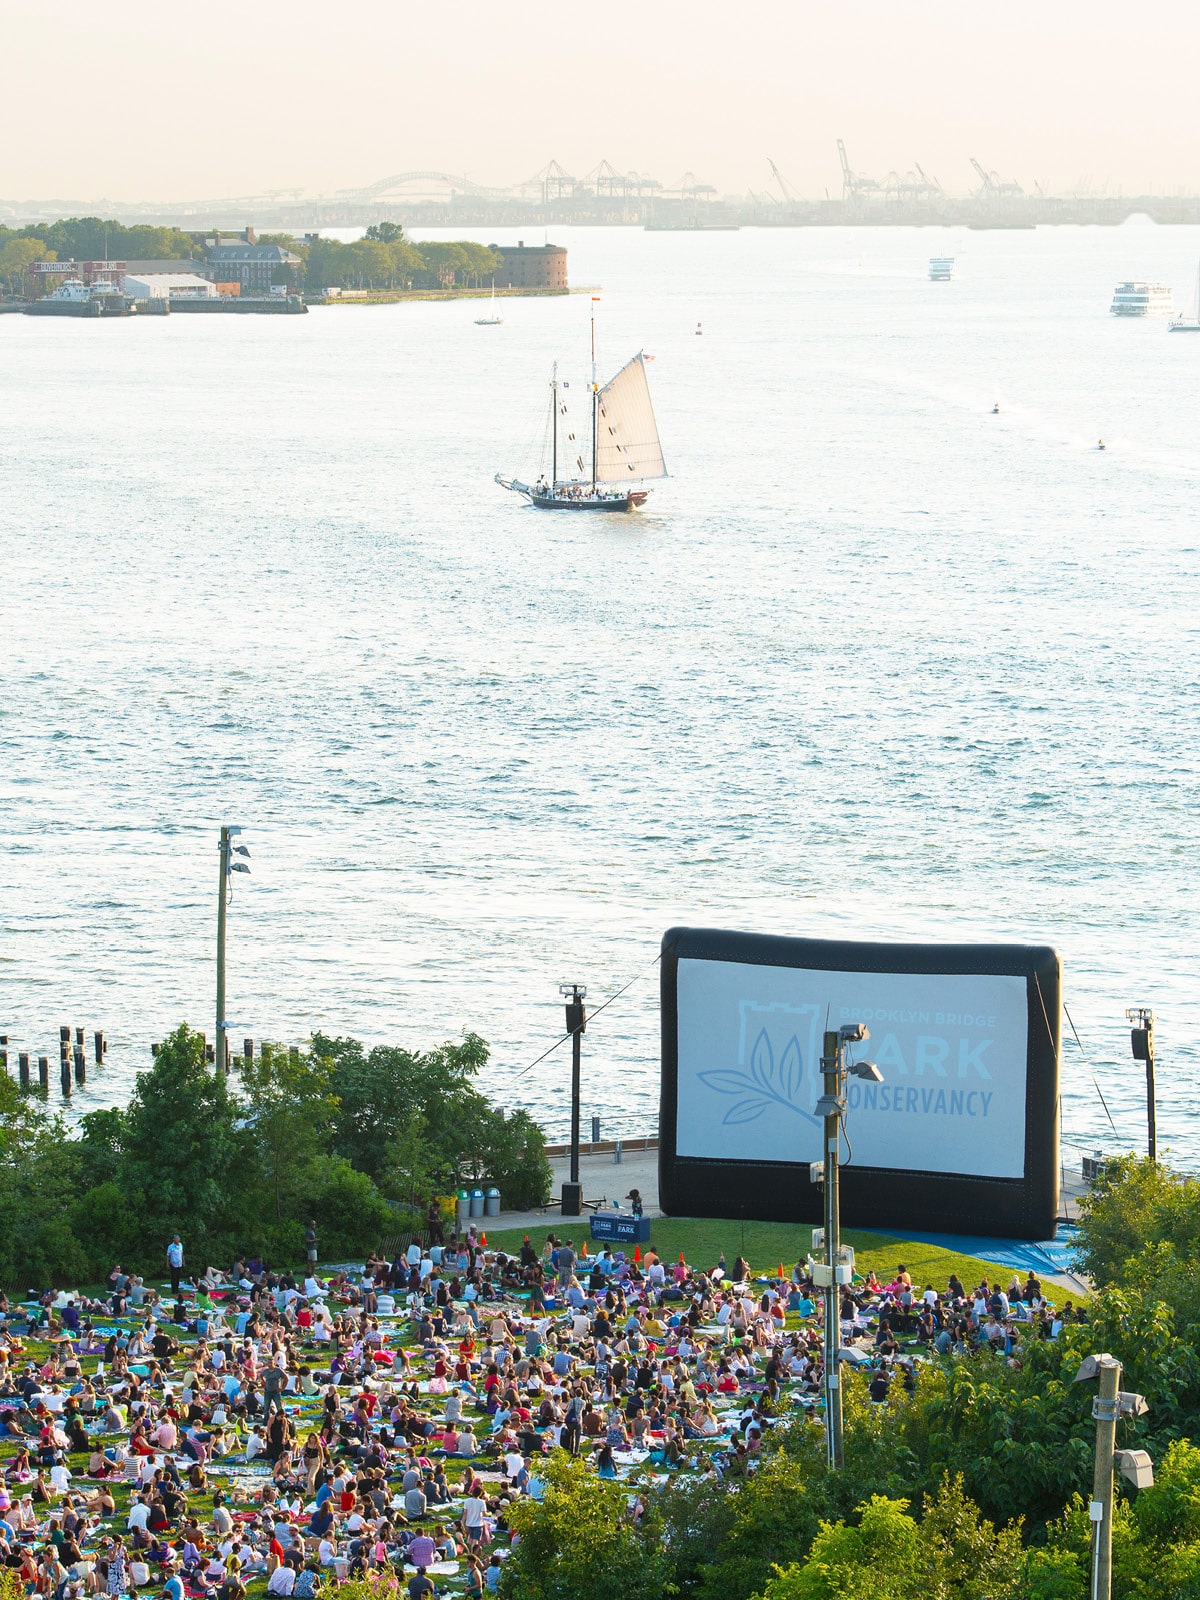 Aerial view of crowd sitting on the lawn facing a large inflatable movie screen at sunset.